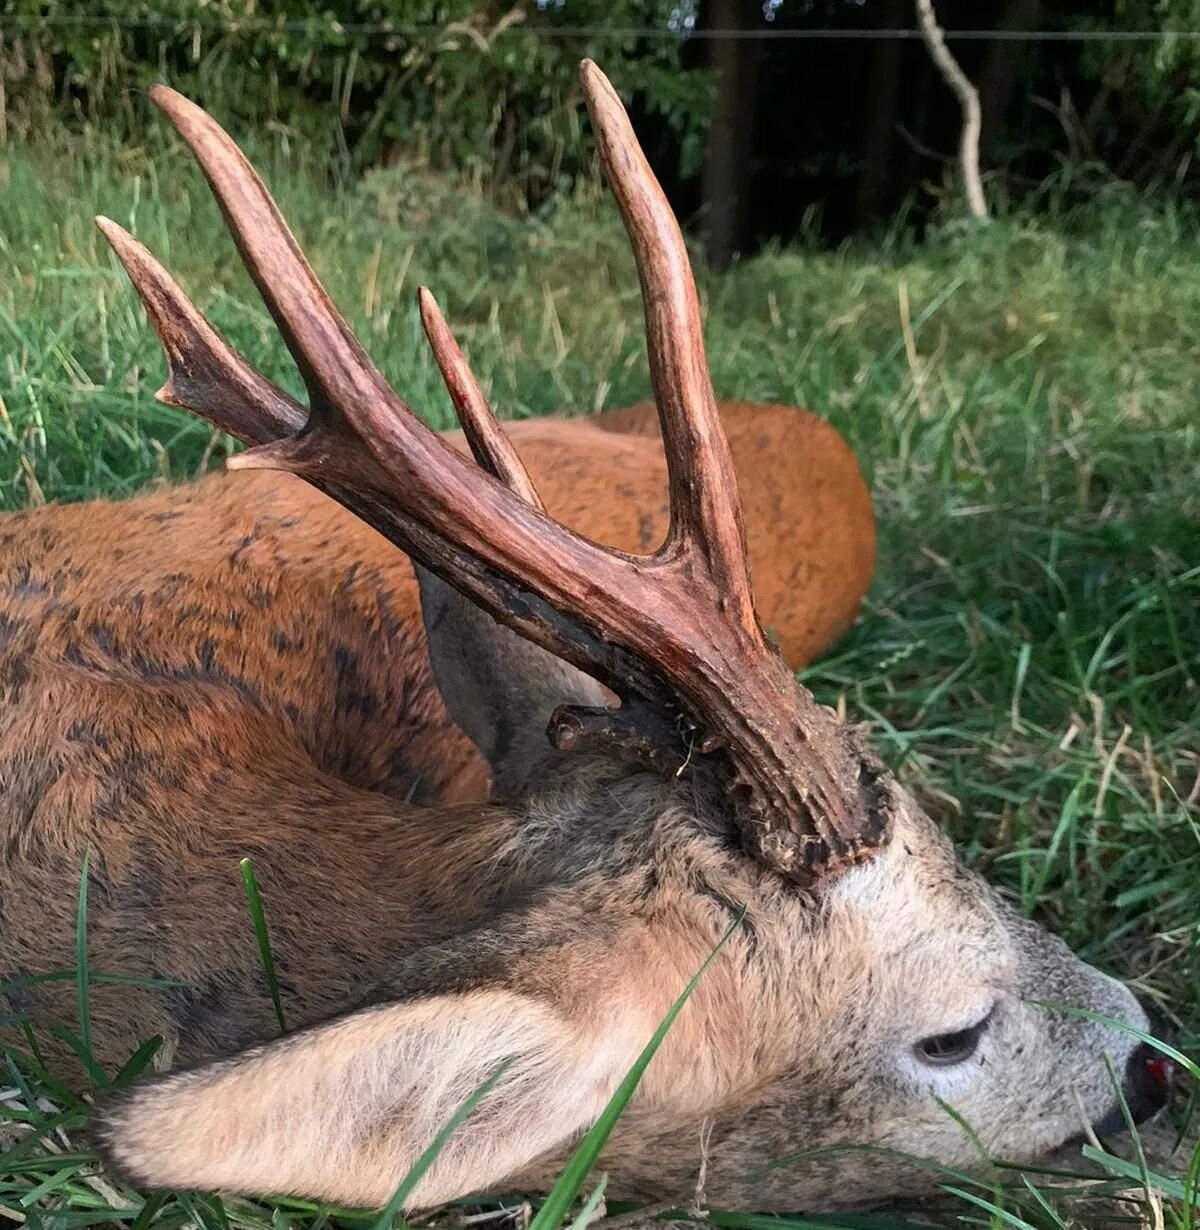 🇬🇧 Has the rut began in your areas yet? 
This one from Sussex, has fantastic red tinges to it's antlers, which I think is handsome. 

🇨🇵 Est ce que le rut &agrave; d&eacute;marrer dans vos secteurs encore? 
Celle ci a des magnifiques aires rouges